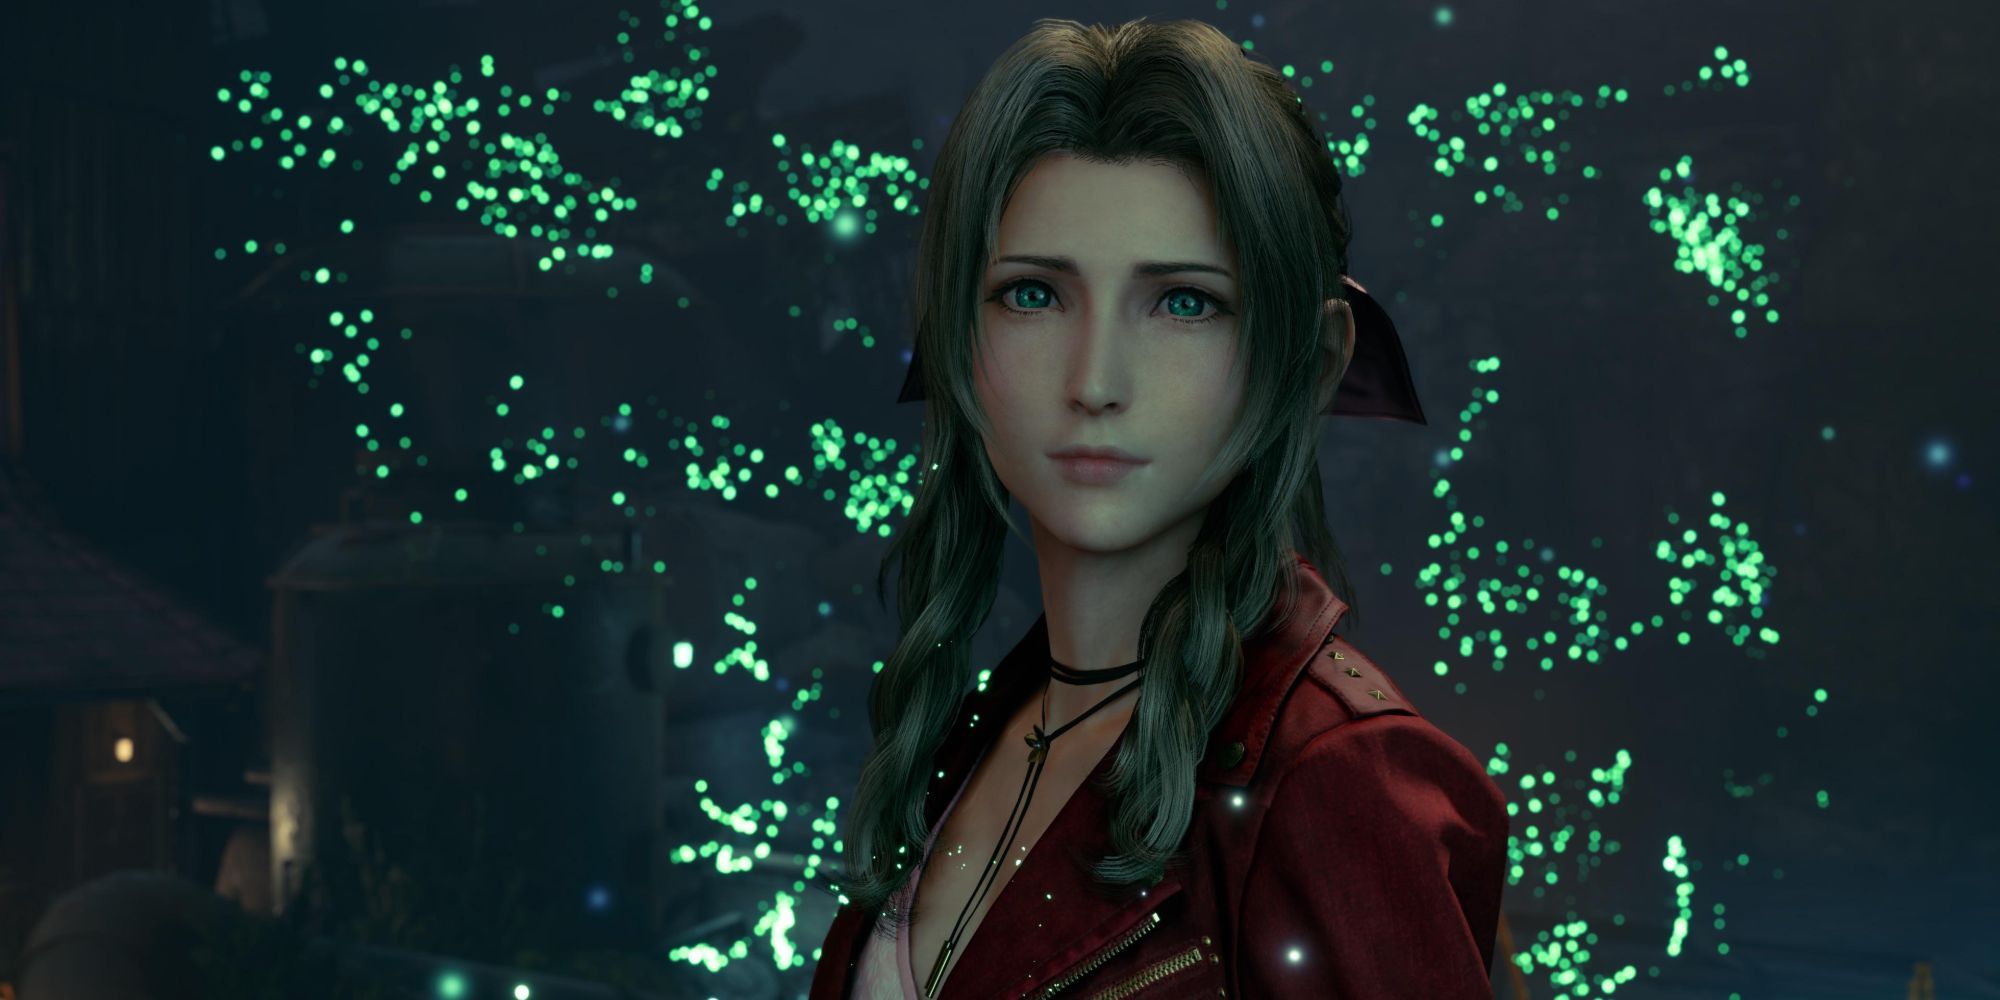 Aerith is surrounded by green light and looks sad.